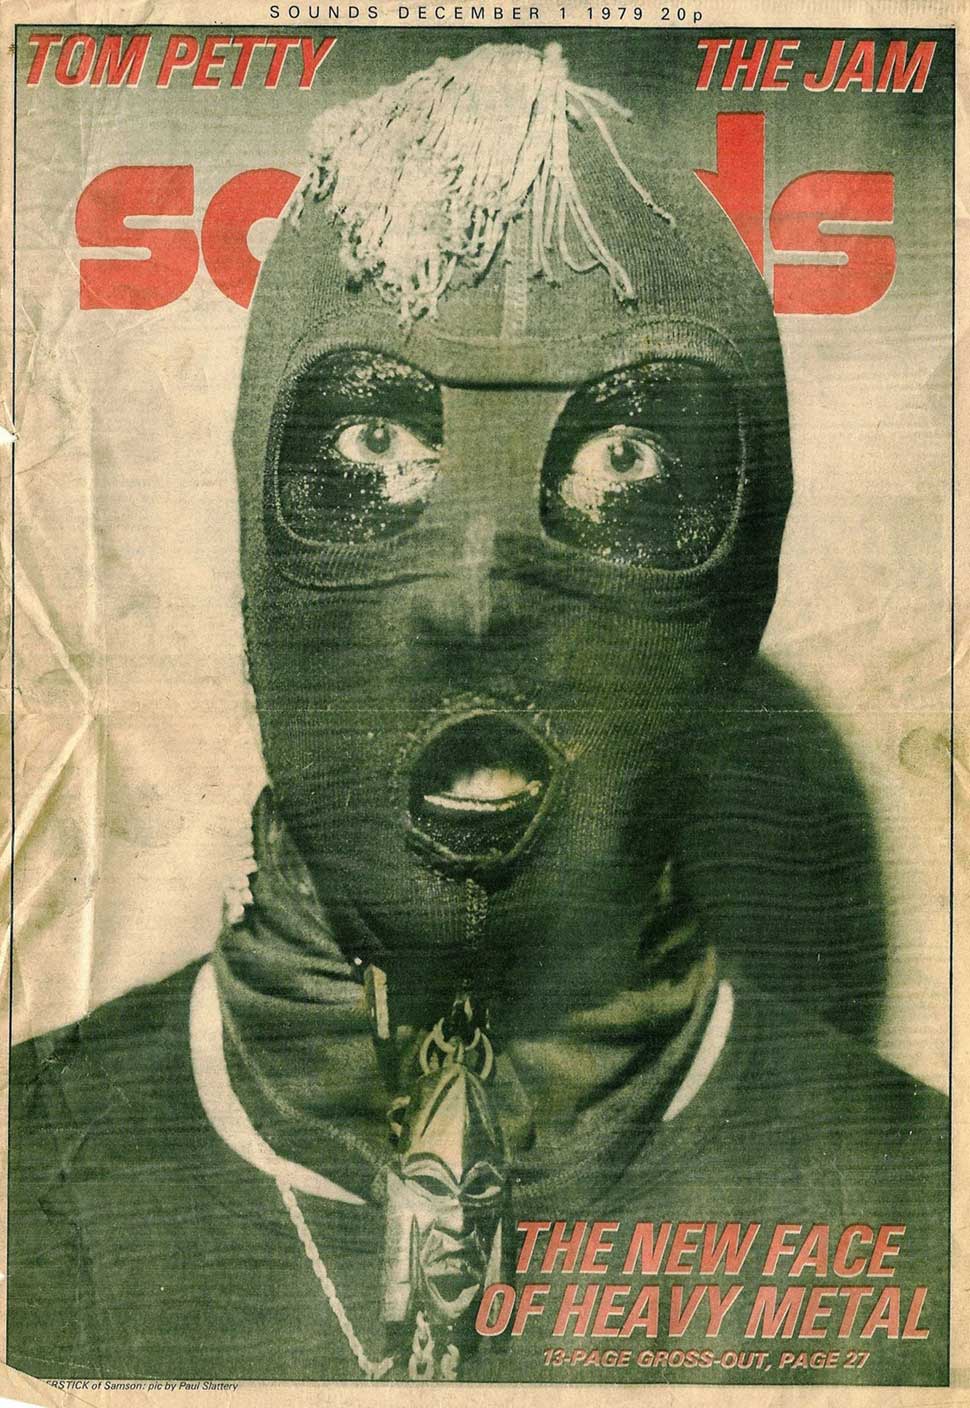 Samson drummer Thunderstick, pictured on the cover of Sounds